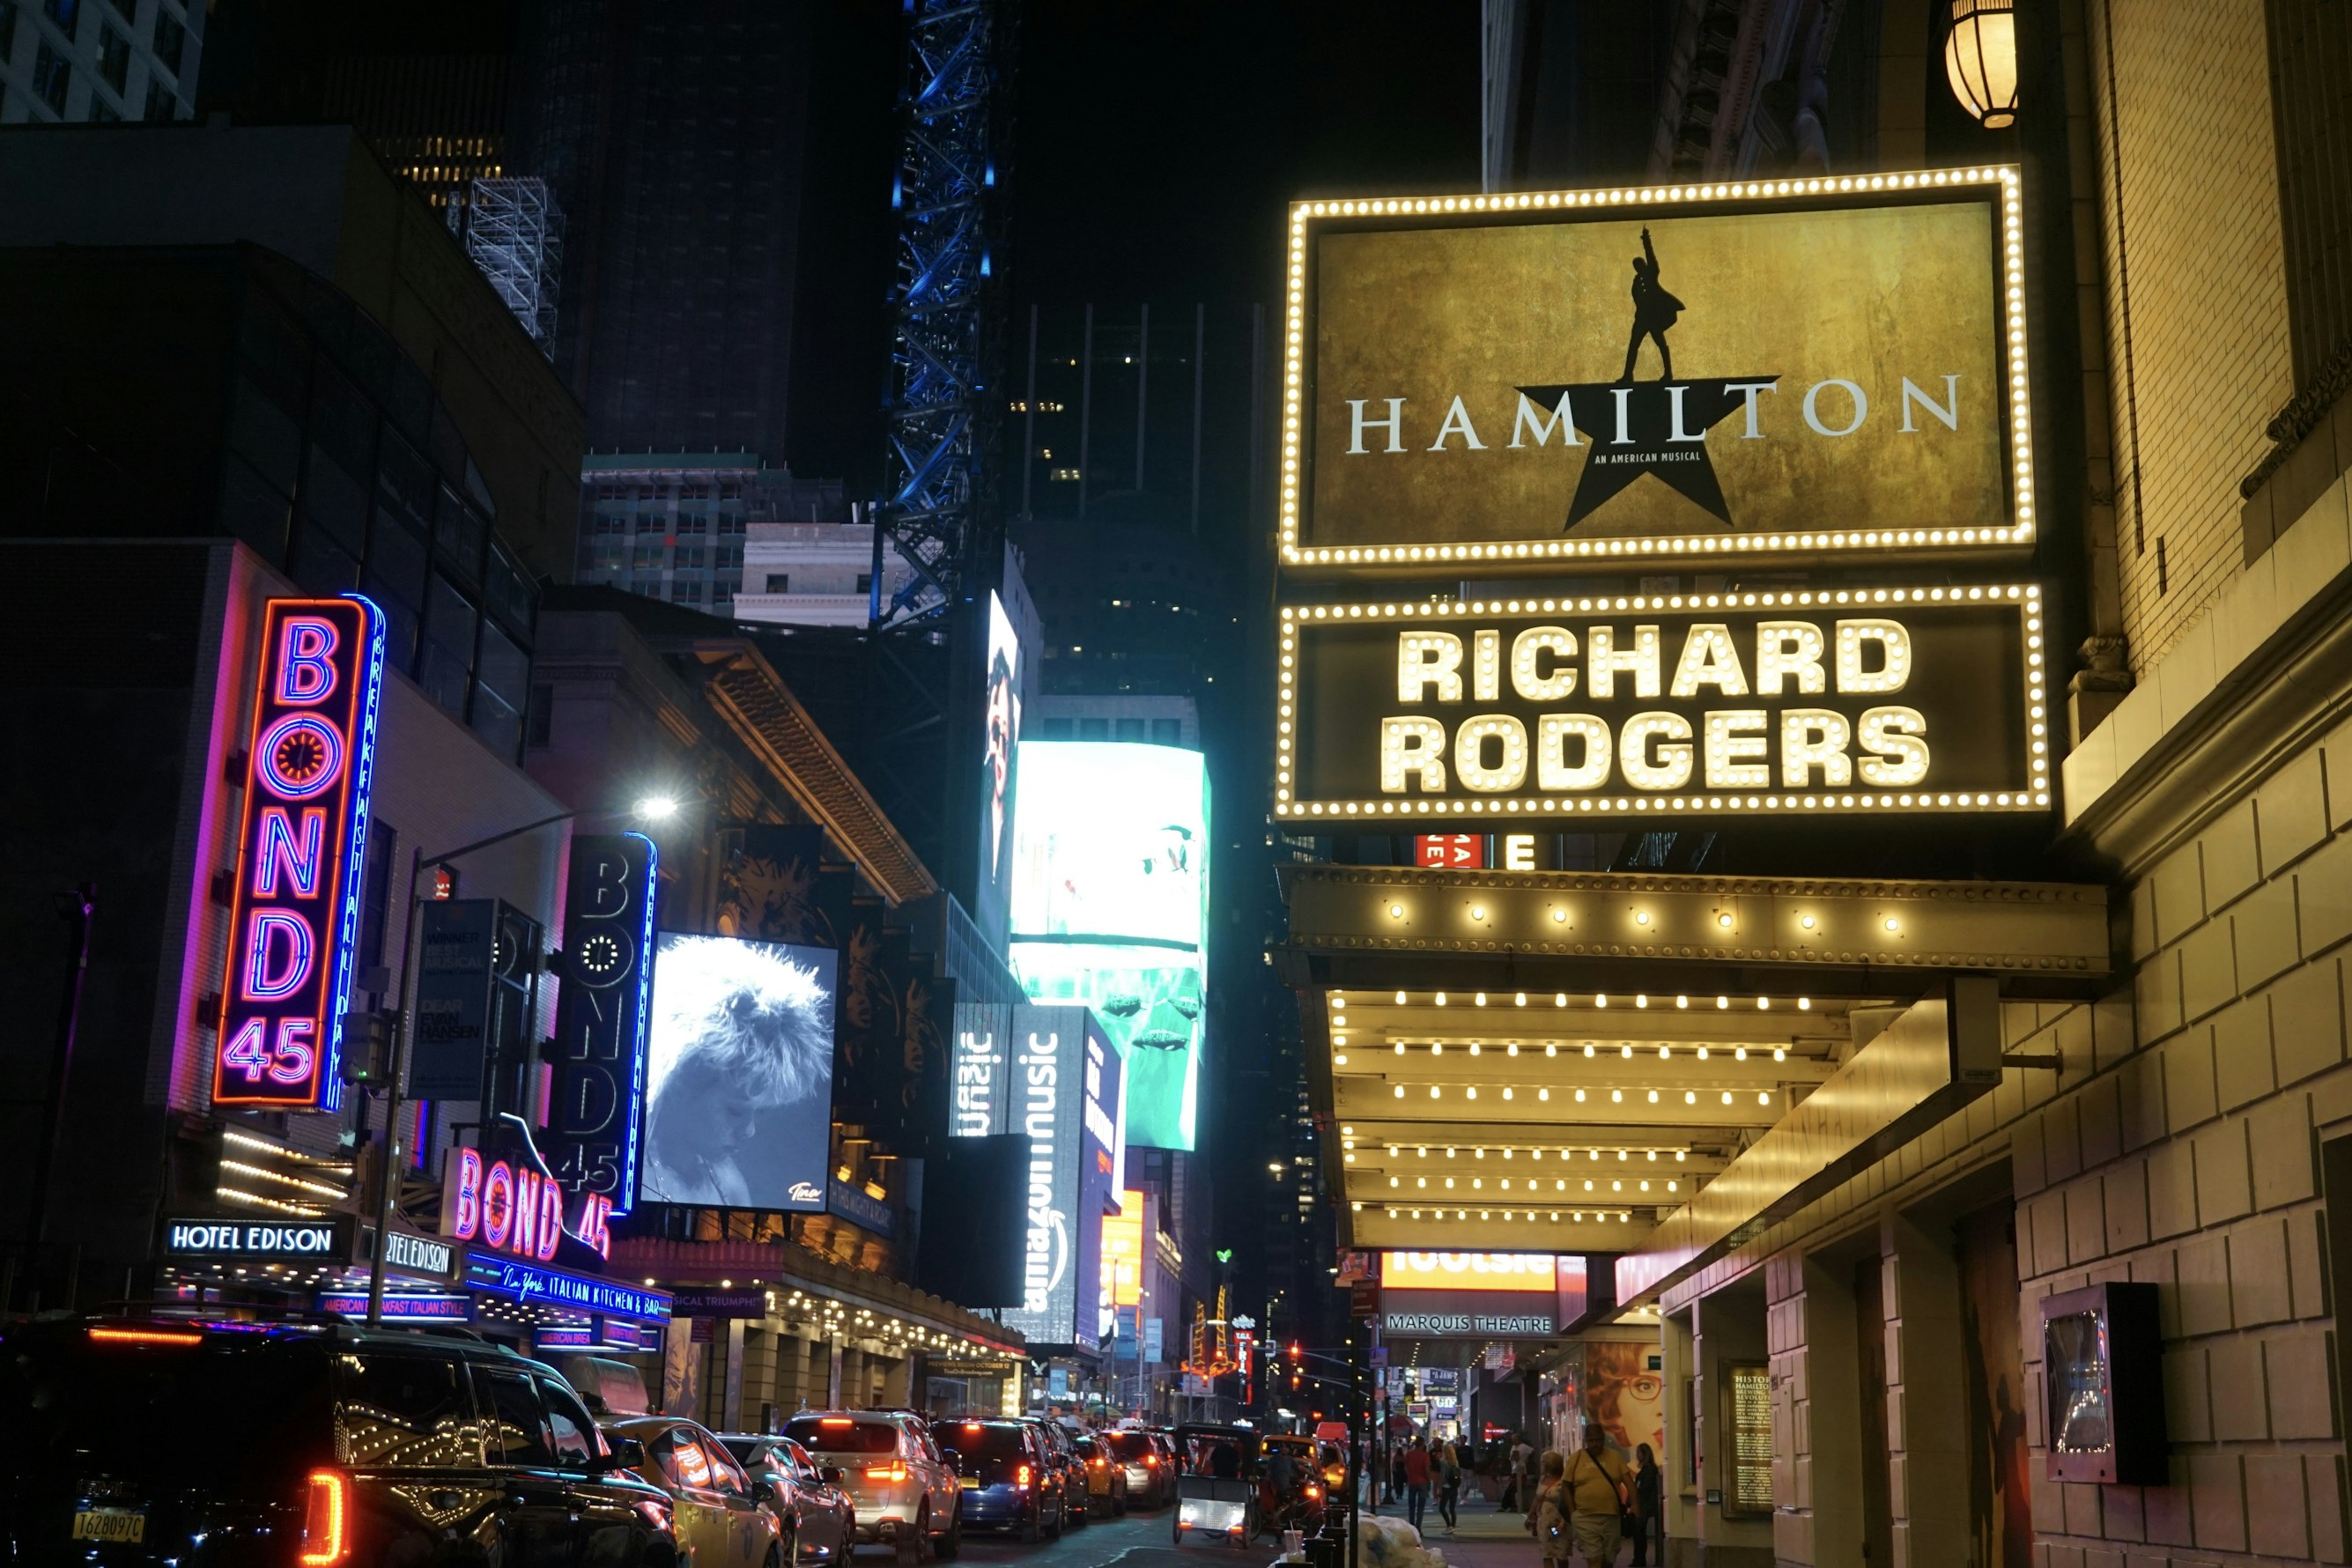 How To Get The Best Priced Broadway Tickets